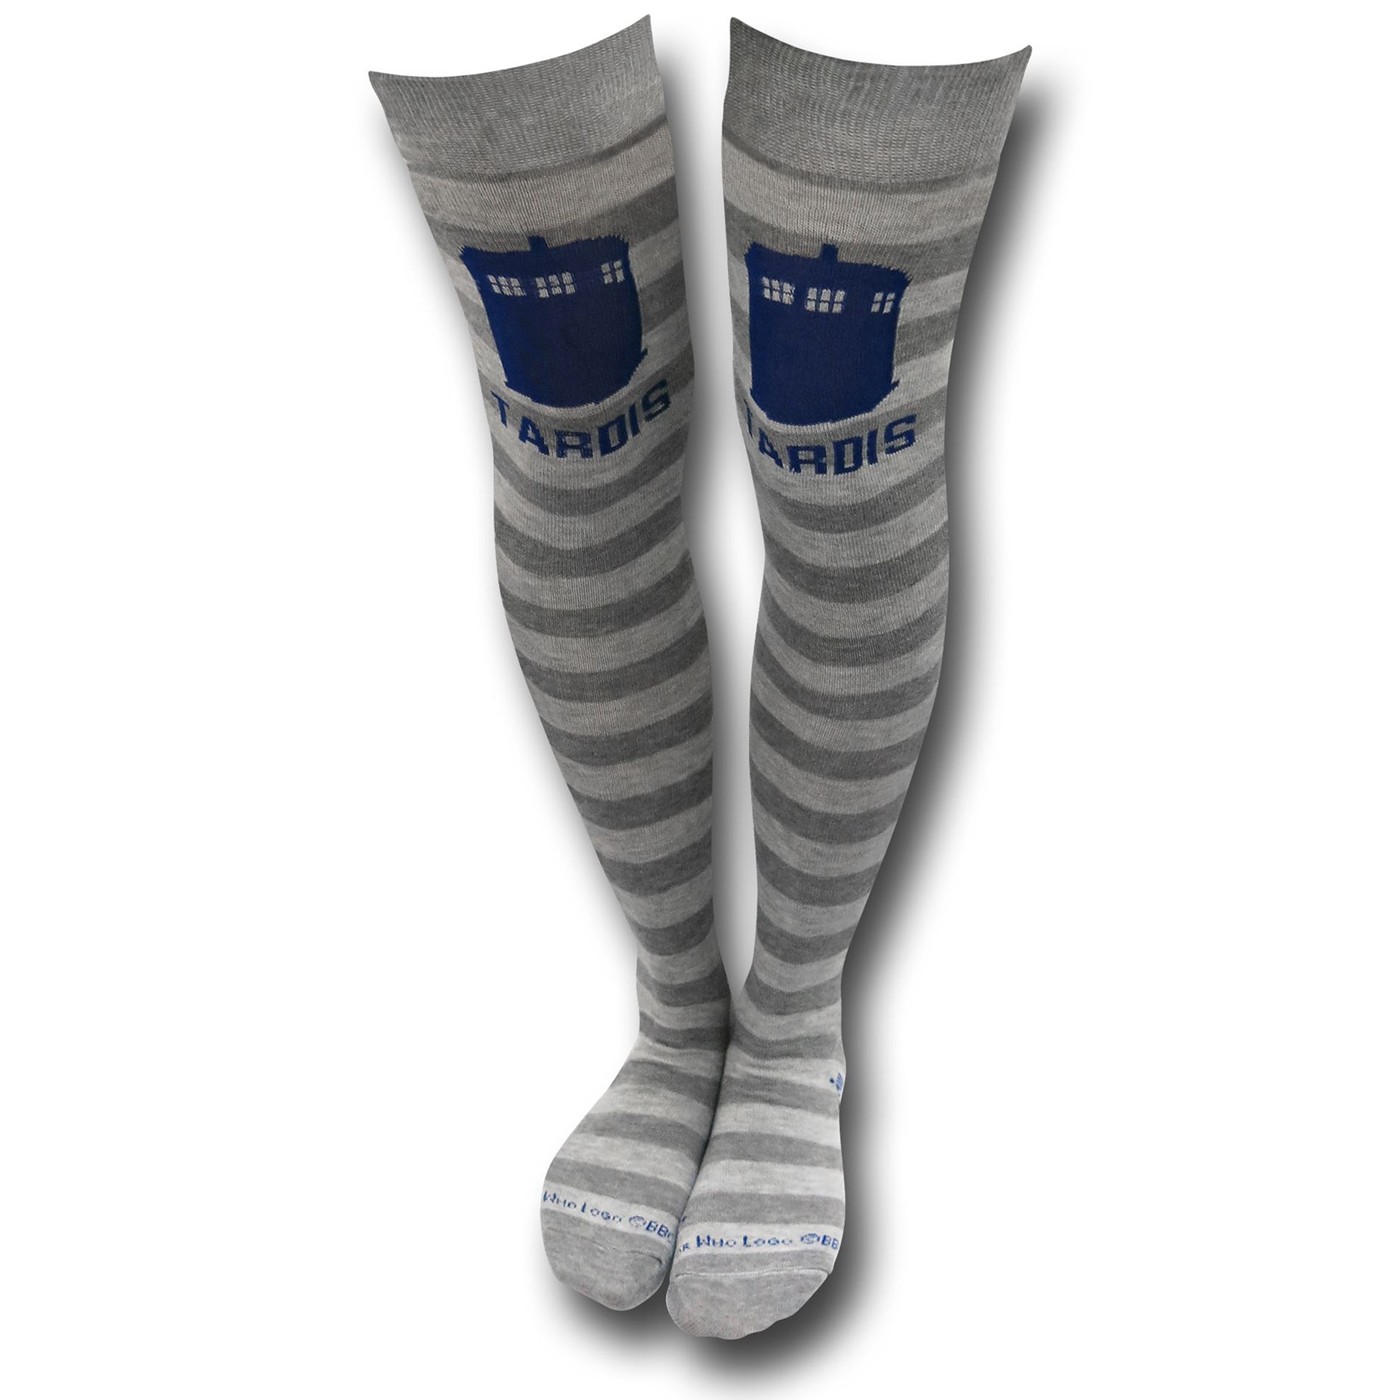 Dr. Who Ladies Over The Knee Rugby Socks